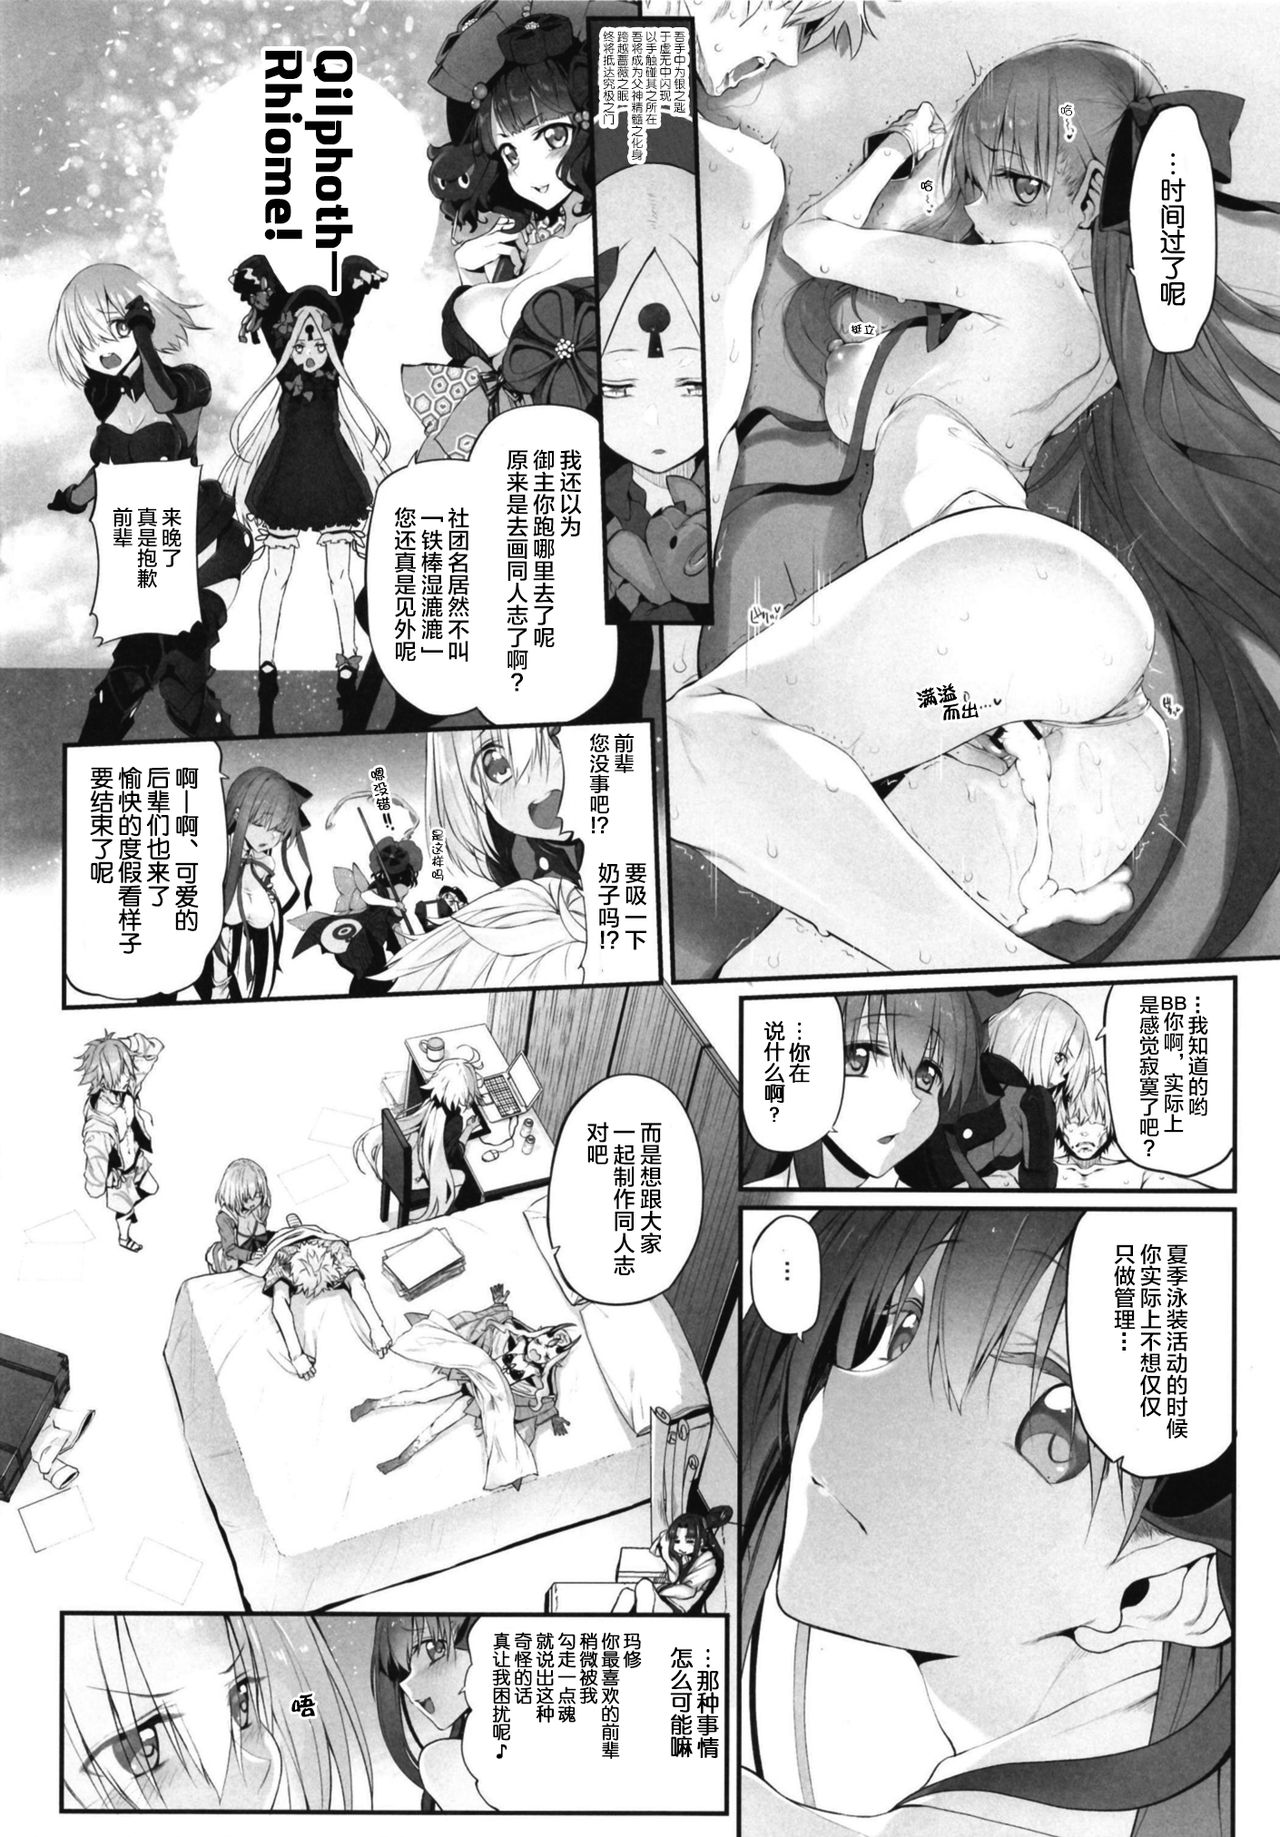 [Marked-two (Suga Hideo)] Marked Girls Vol. 19 (Fate Grand Order) [Chinese] [lolipoi汉化组][Digital] page 21 full